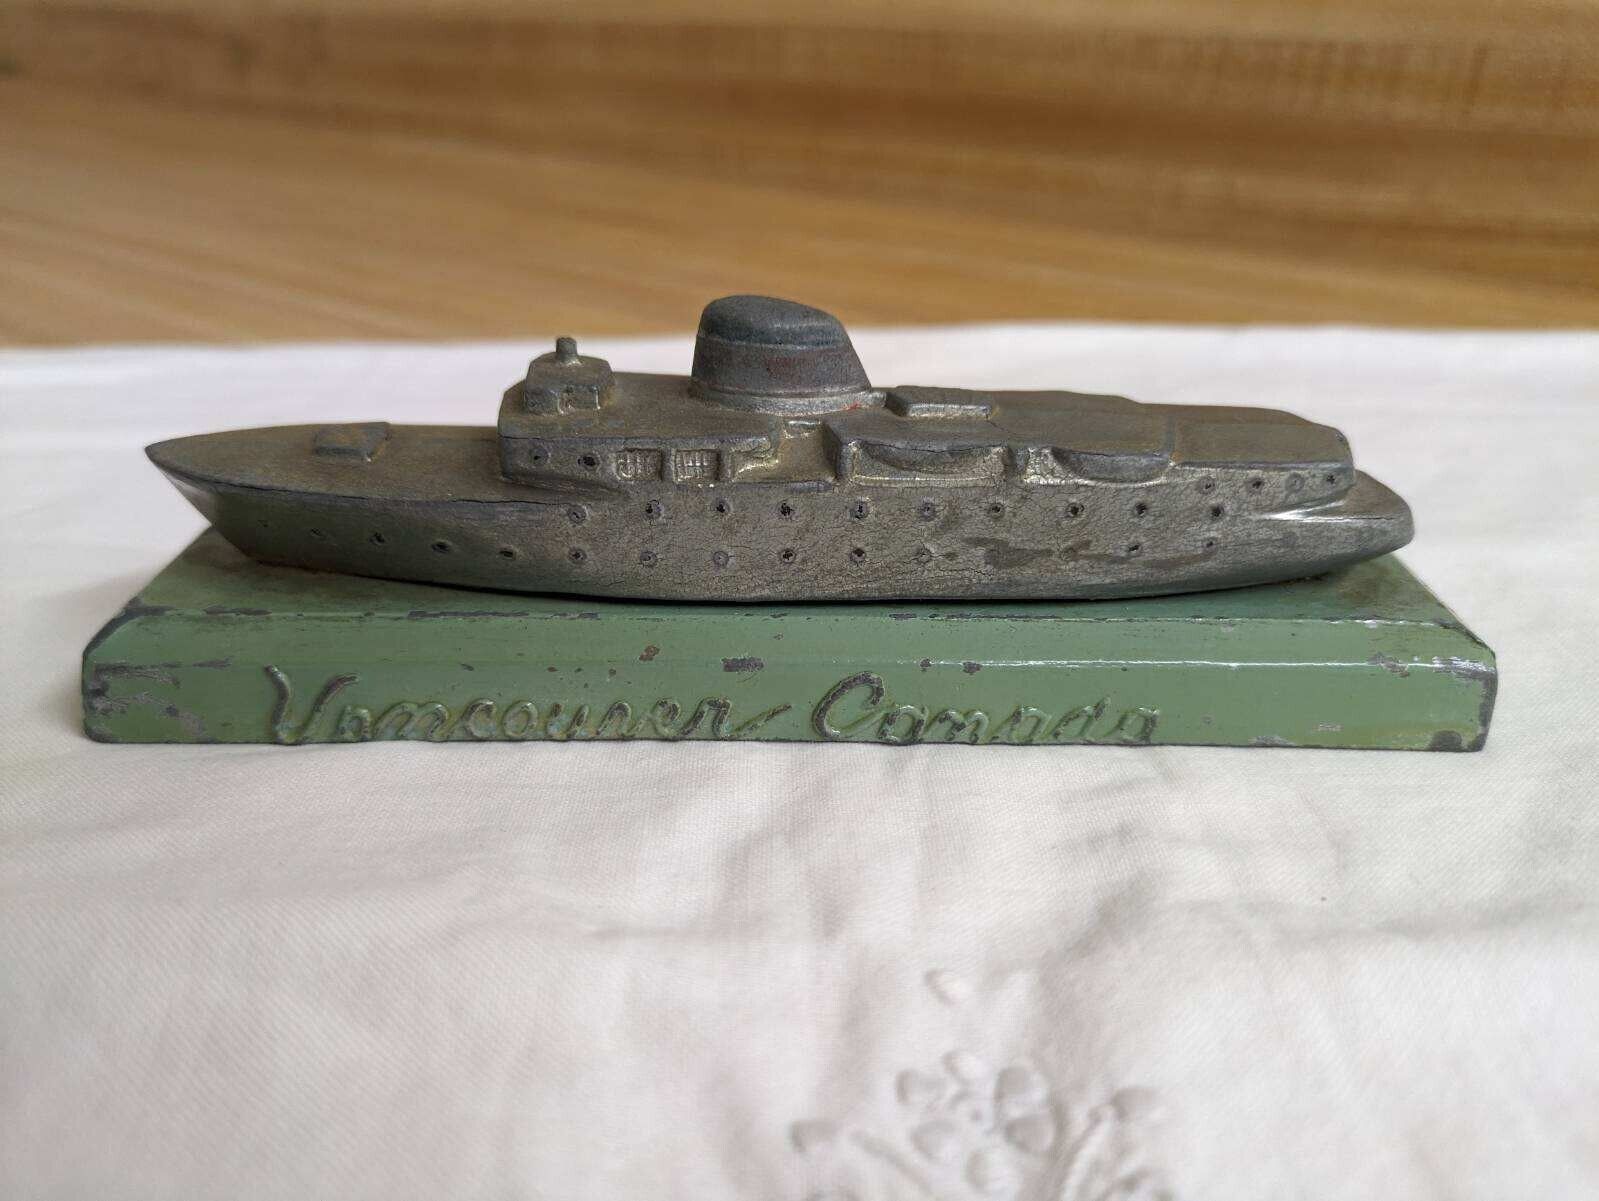 Vtg. painted metal Union Steamships Ltd. Vancouver, Ca. paperweight.